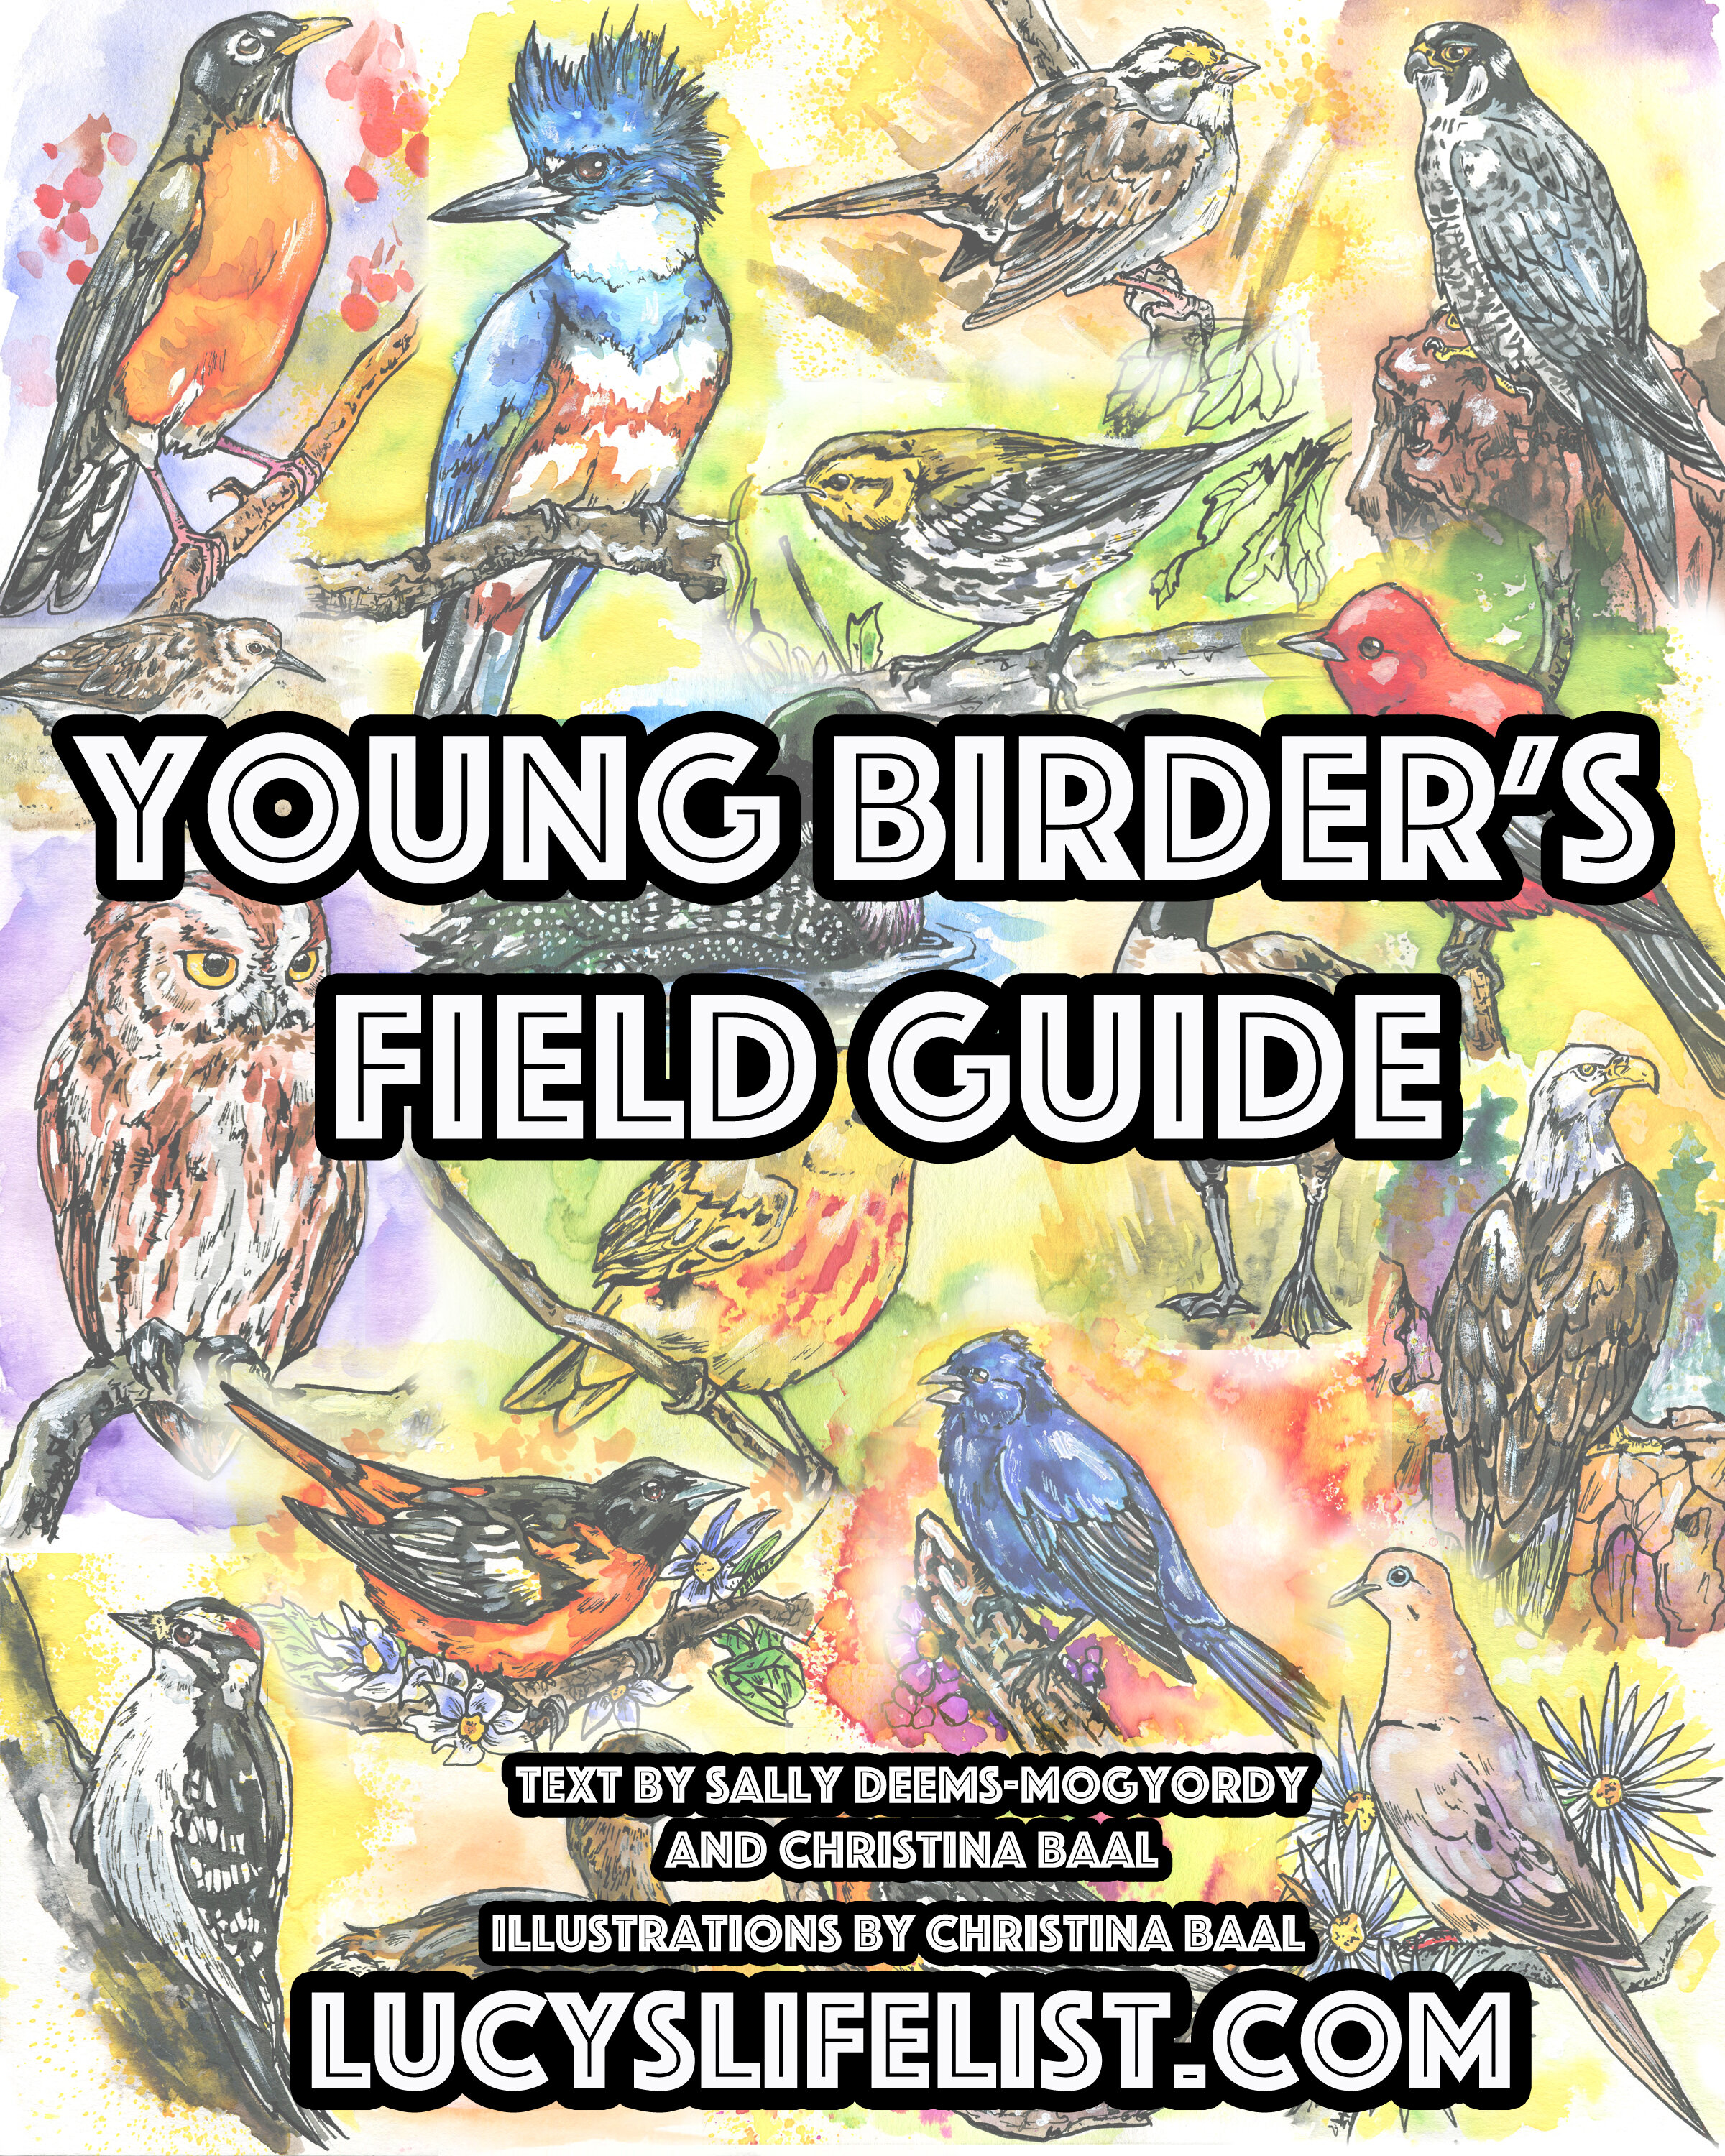 Young Birder's Field Guide (Copy)